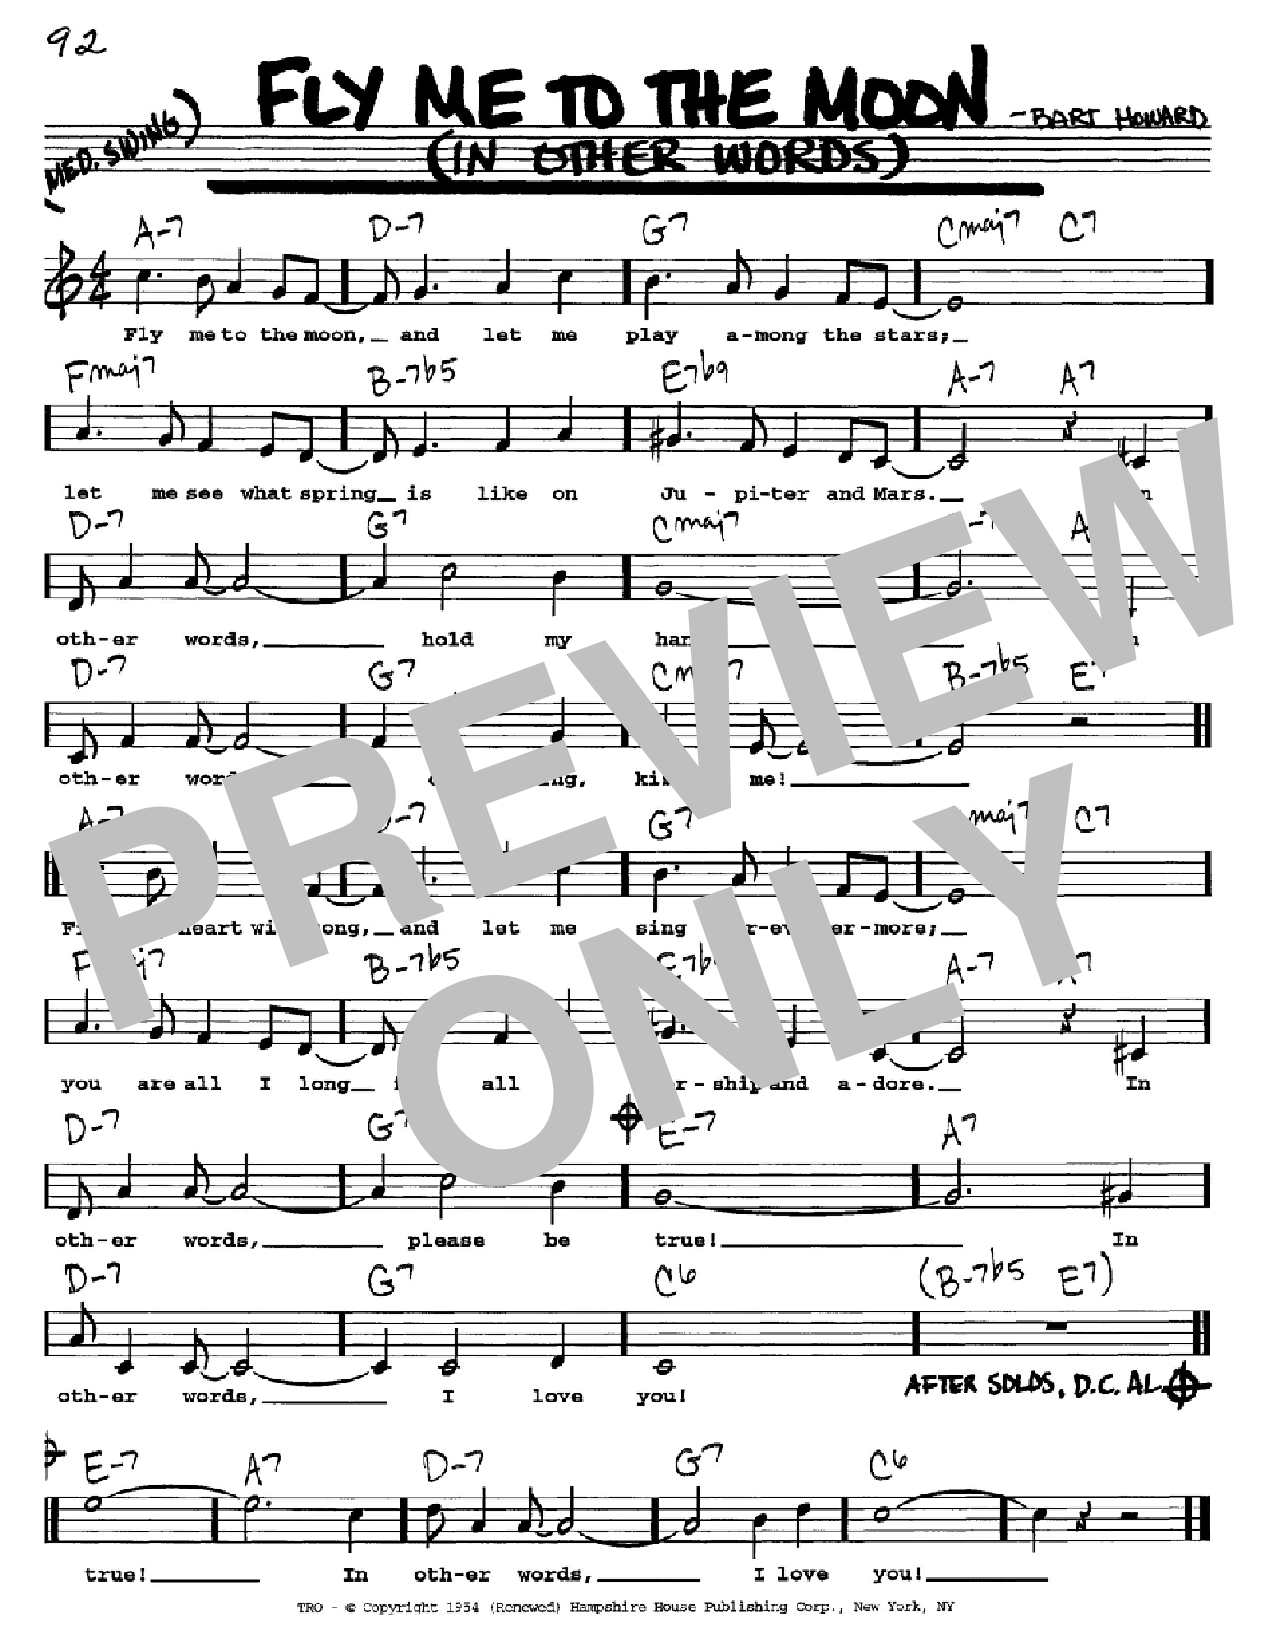 Download Frank Sinatra Fly Me To The Moon (In Other Words) Sheet Music